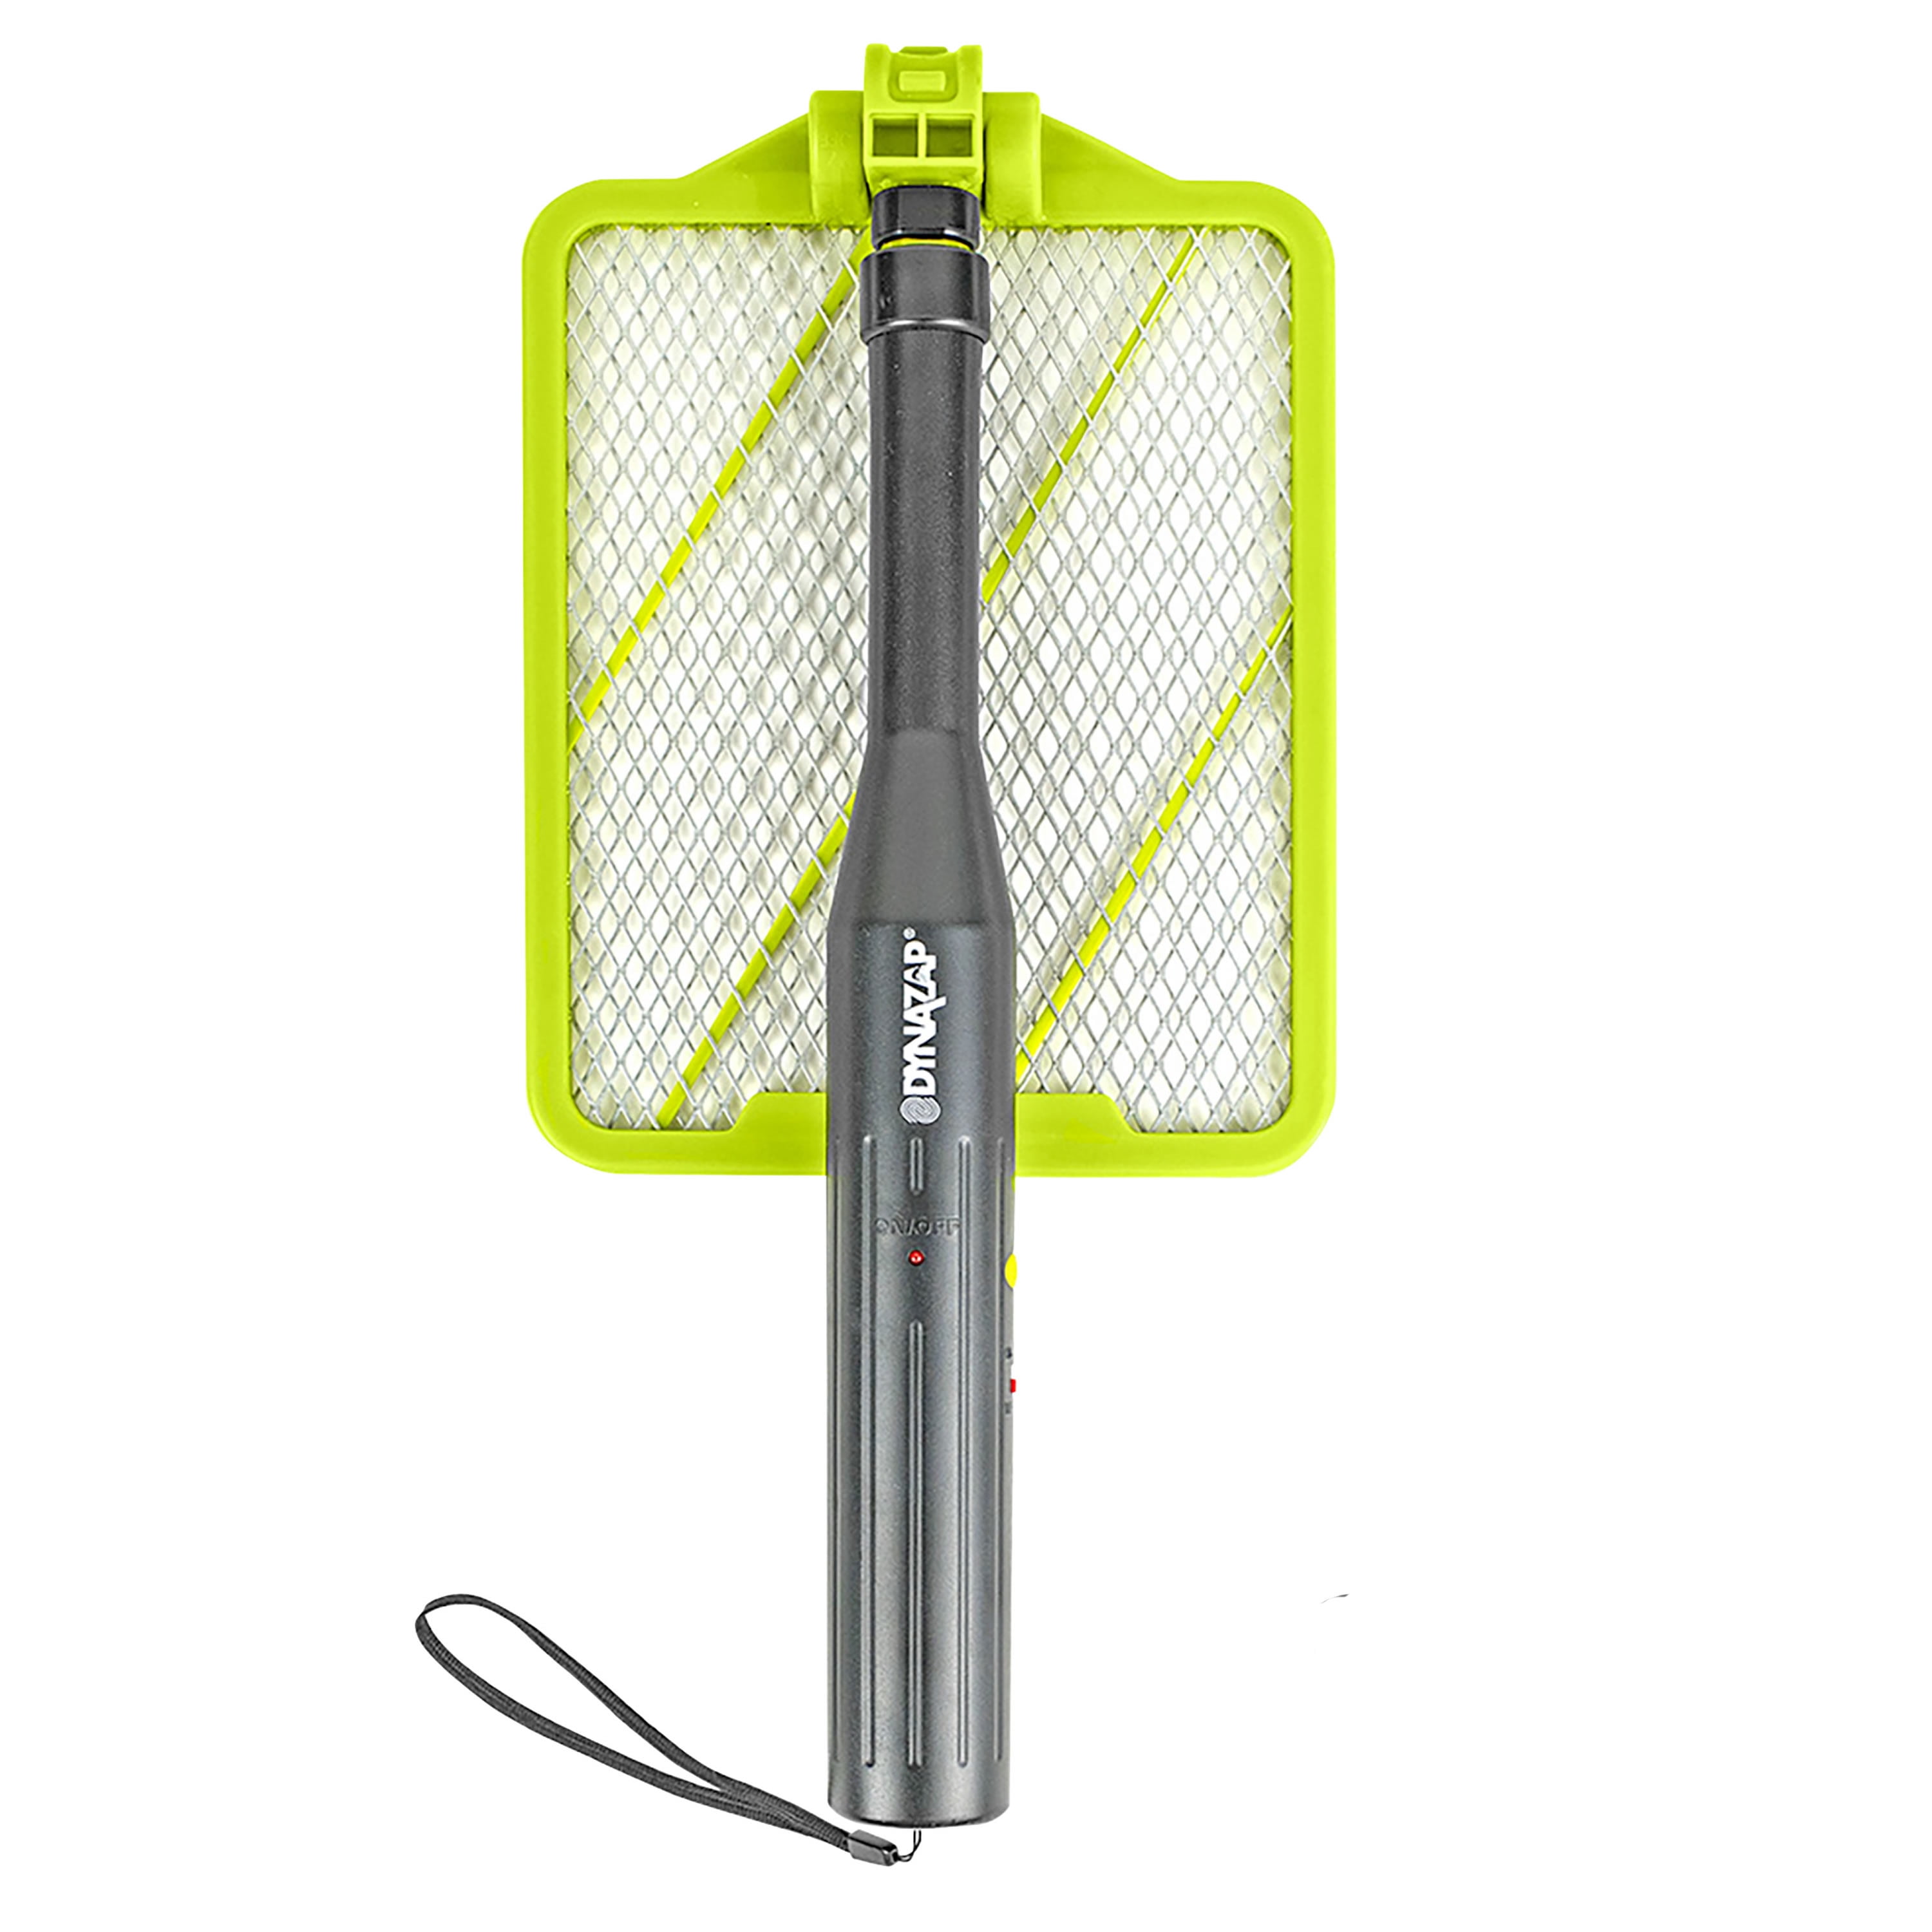 Dynazap Handheld 3' Battery Operated Extendable Fly Bug Insect Zapper DZ30100 